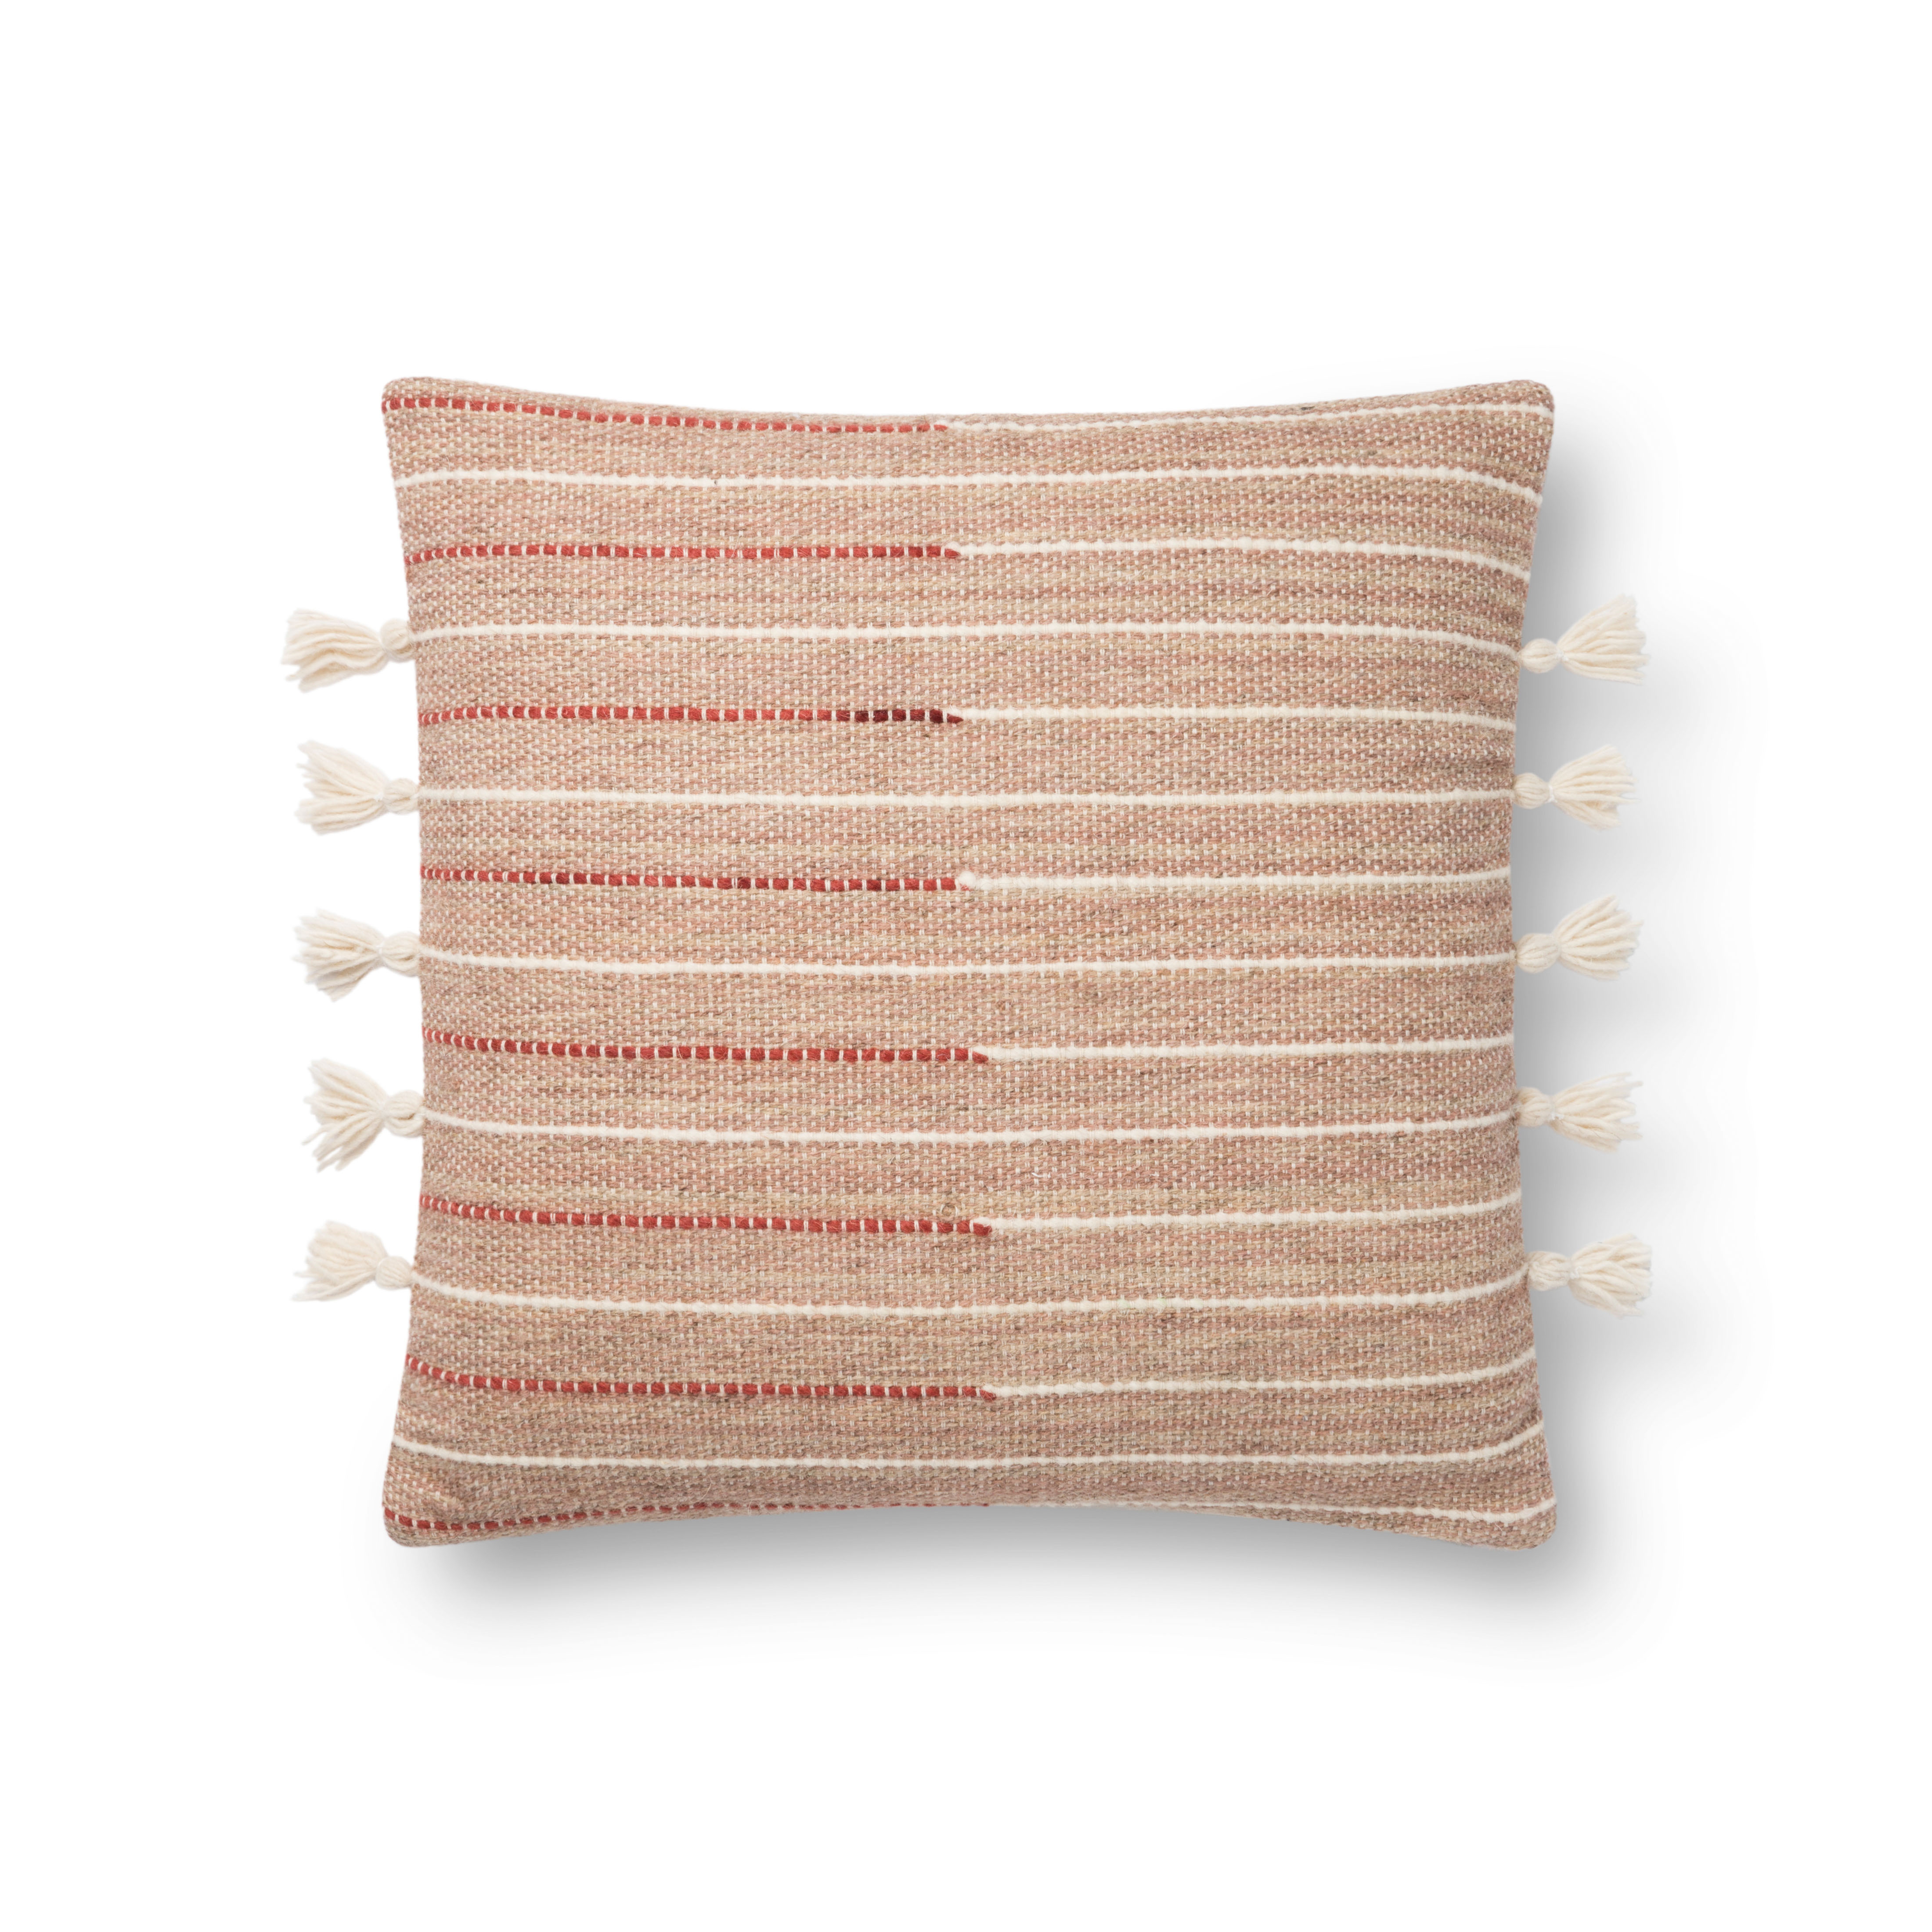 PILLOWS P1122 BLUSH/MULTI 18" x 18" Cover w/Poly - Magnolia Home by Joana Gaines Crafted by Loloi Rugs